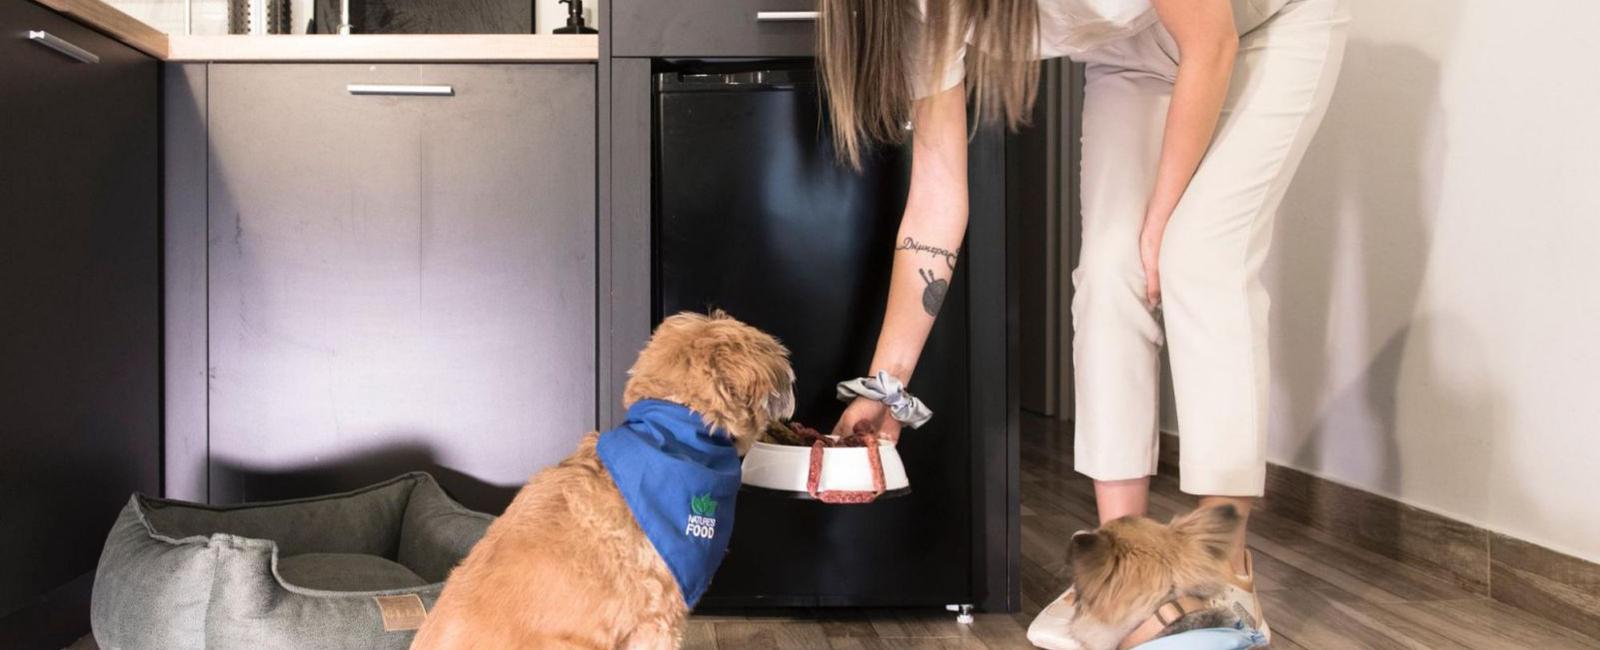 Dog Only Eats When You Watch? Here’s How to Encourage Independent Eating